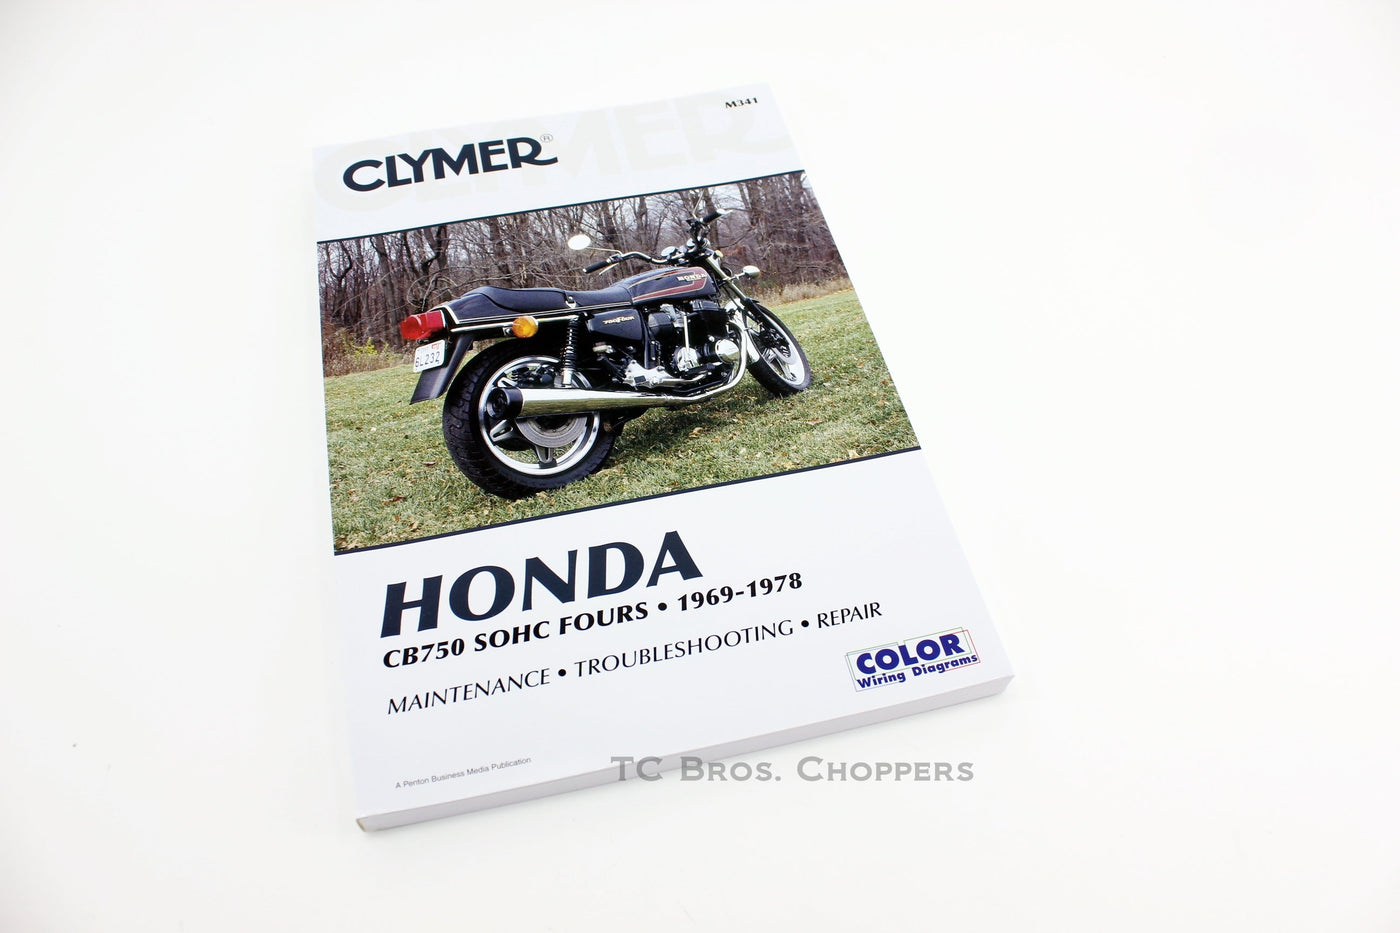 The 1969-1978 Honda CB750 SOHC Clymer Repair Manual is a valuable resource for anyone in need of guidance on maintaining and fixing their Honda CB750.